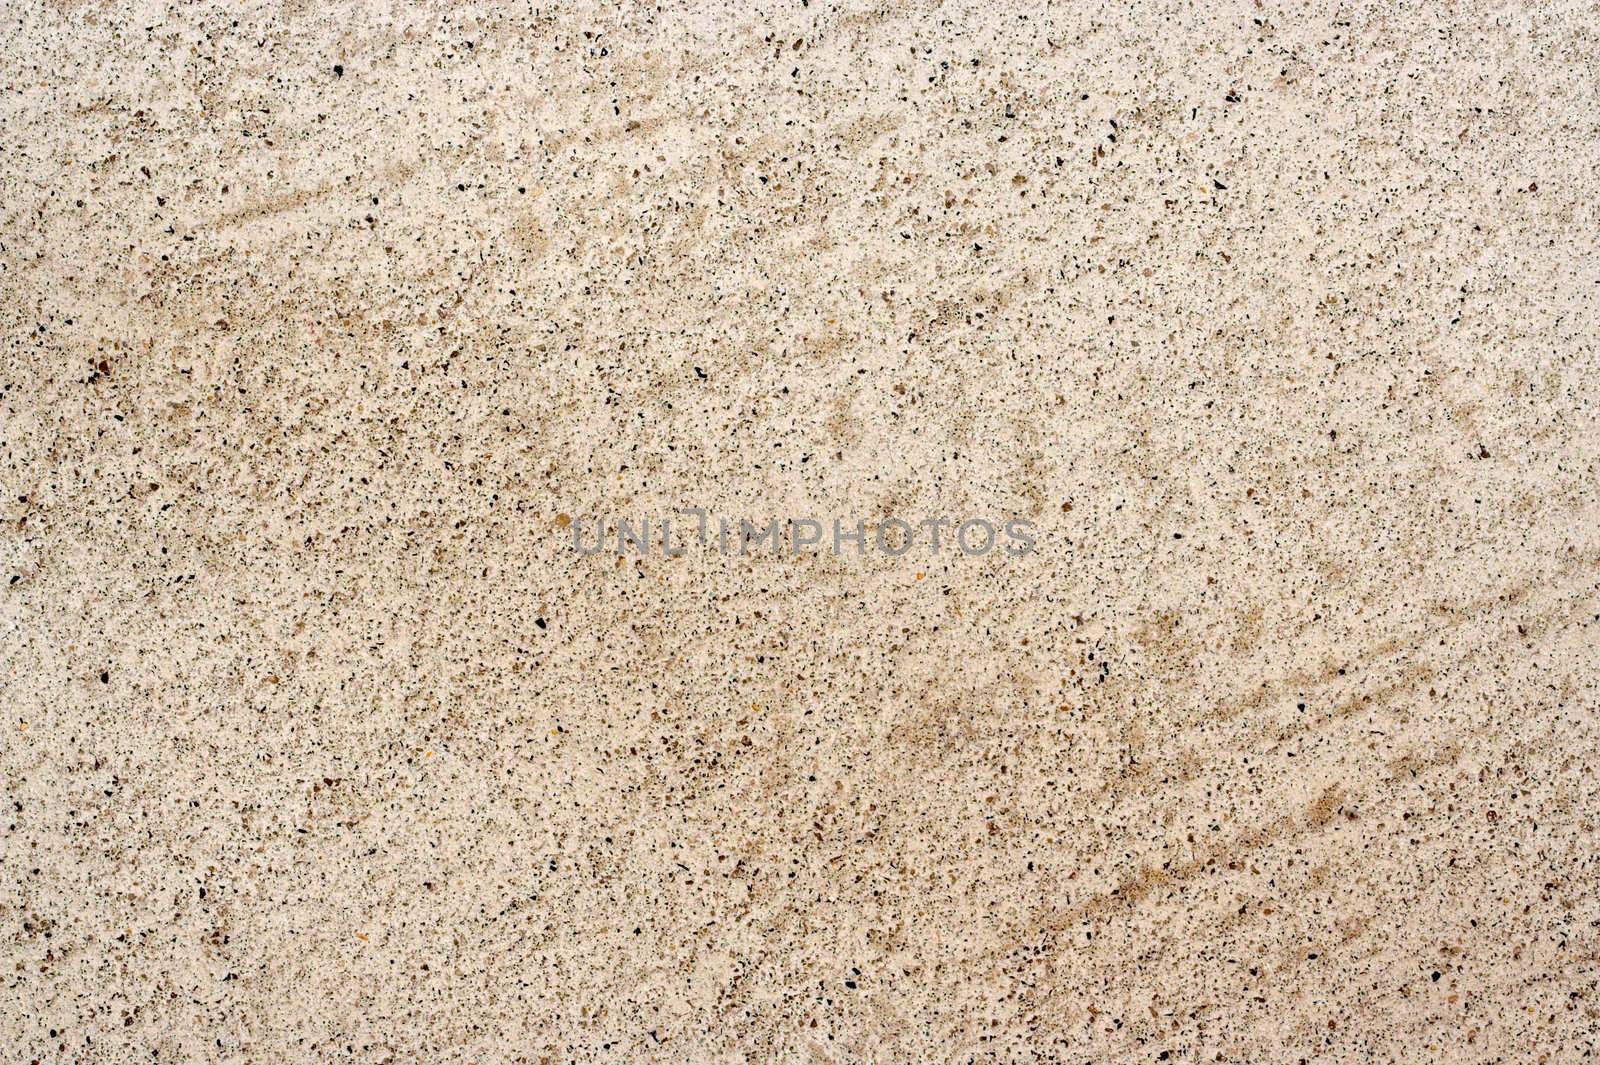 Concrete background showing details and texture